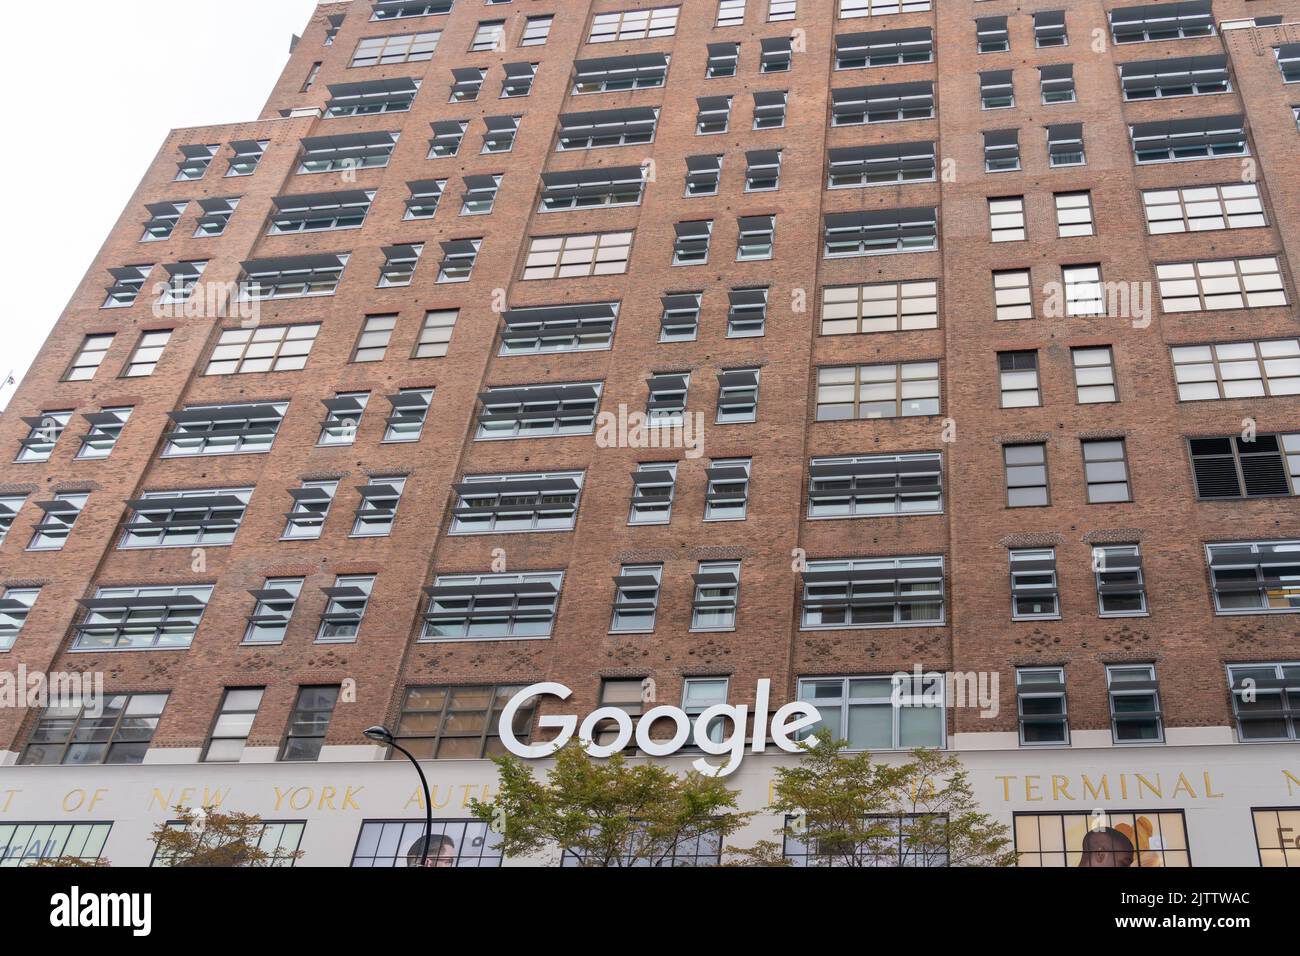 New York, NY, USA - August 22, 2022: Google office building in New York City, USA. Stock Photo